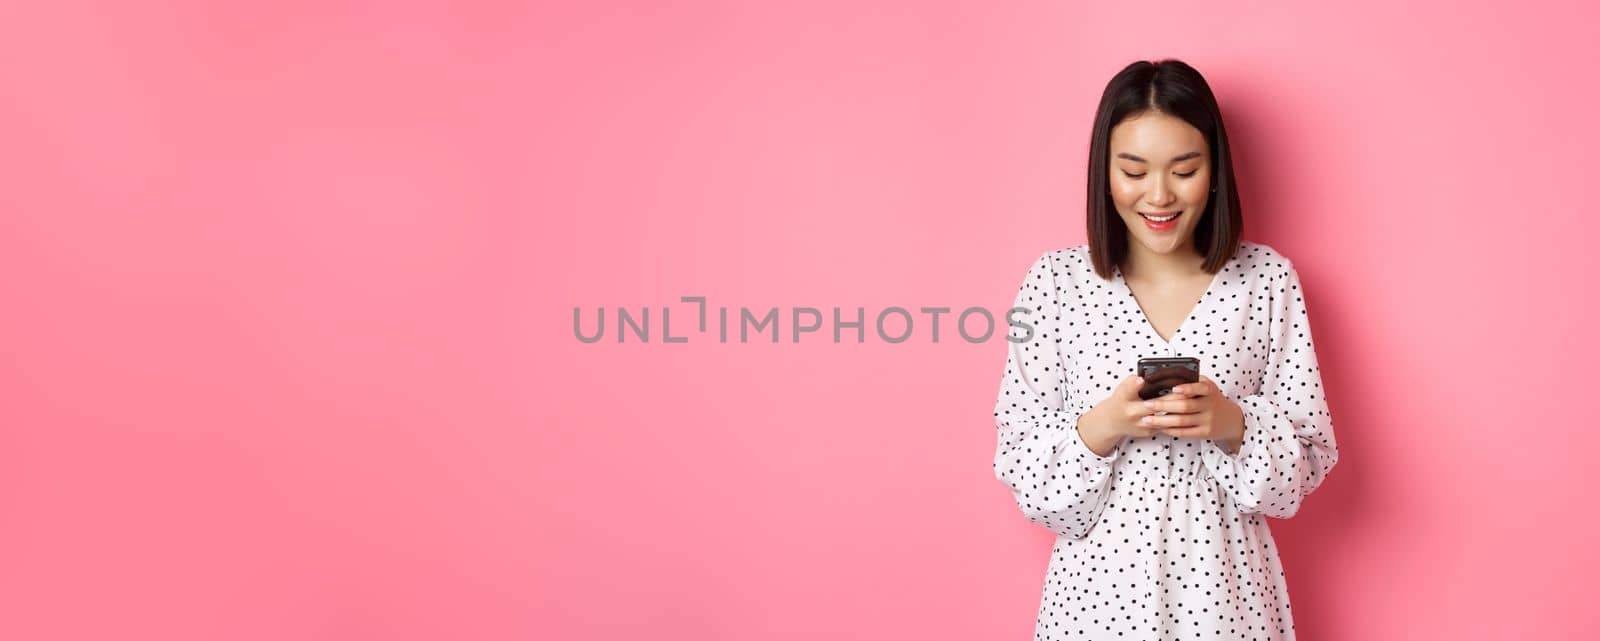 Beautiful asian lady reading message and smiling, using mobile phone, standing in cute dress against pink background.